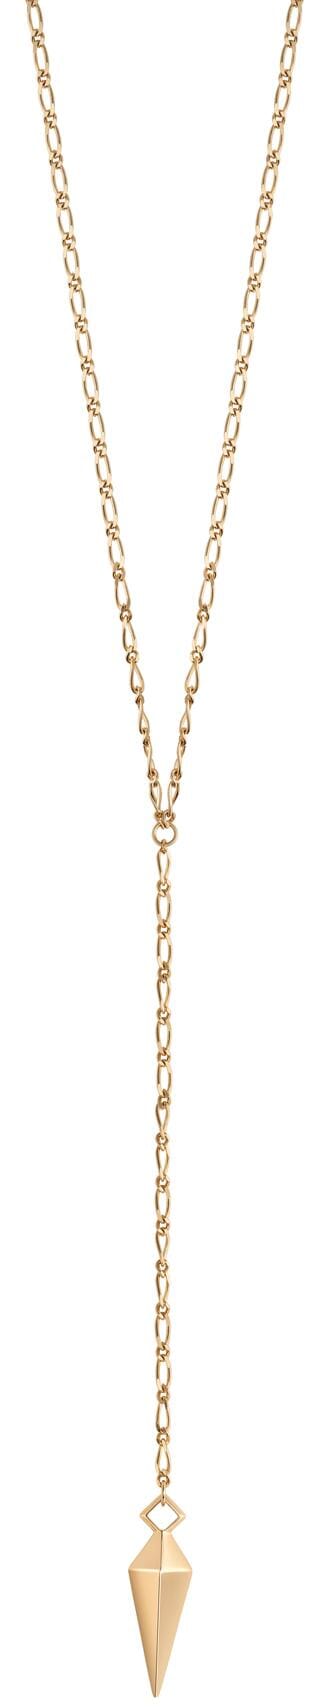 Yellow Gold Lariat Necklace.